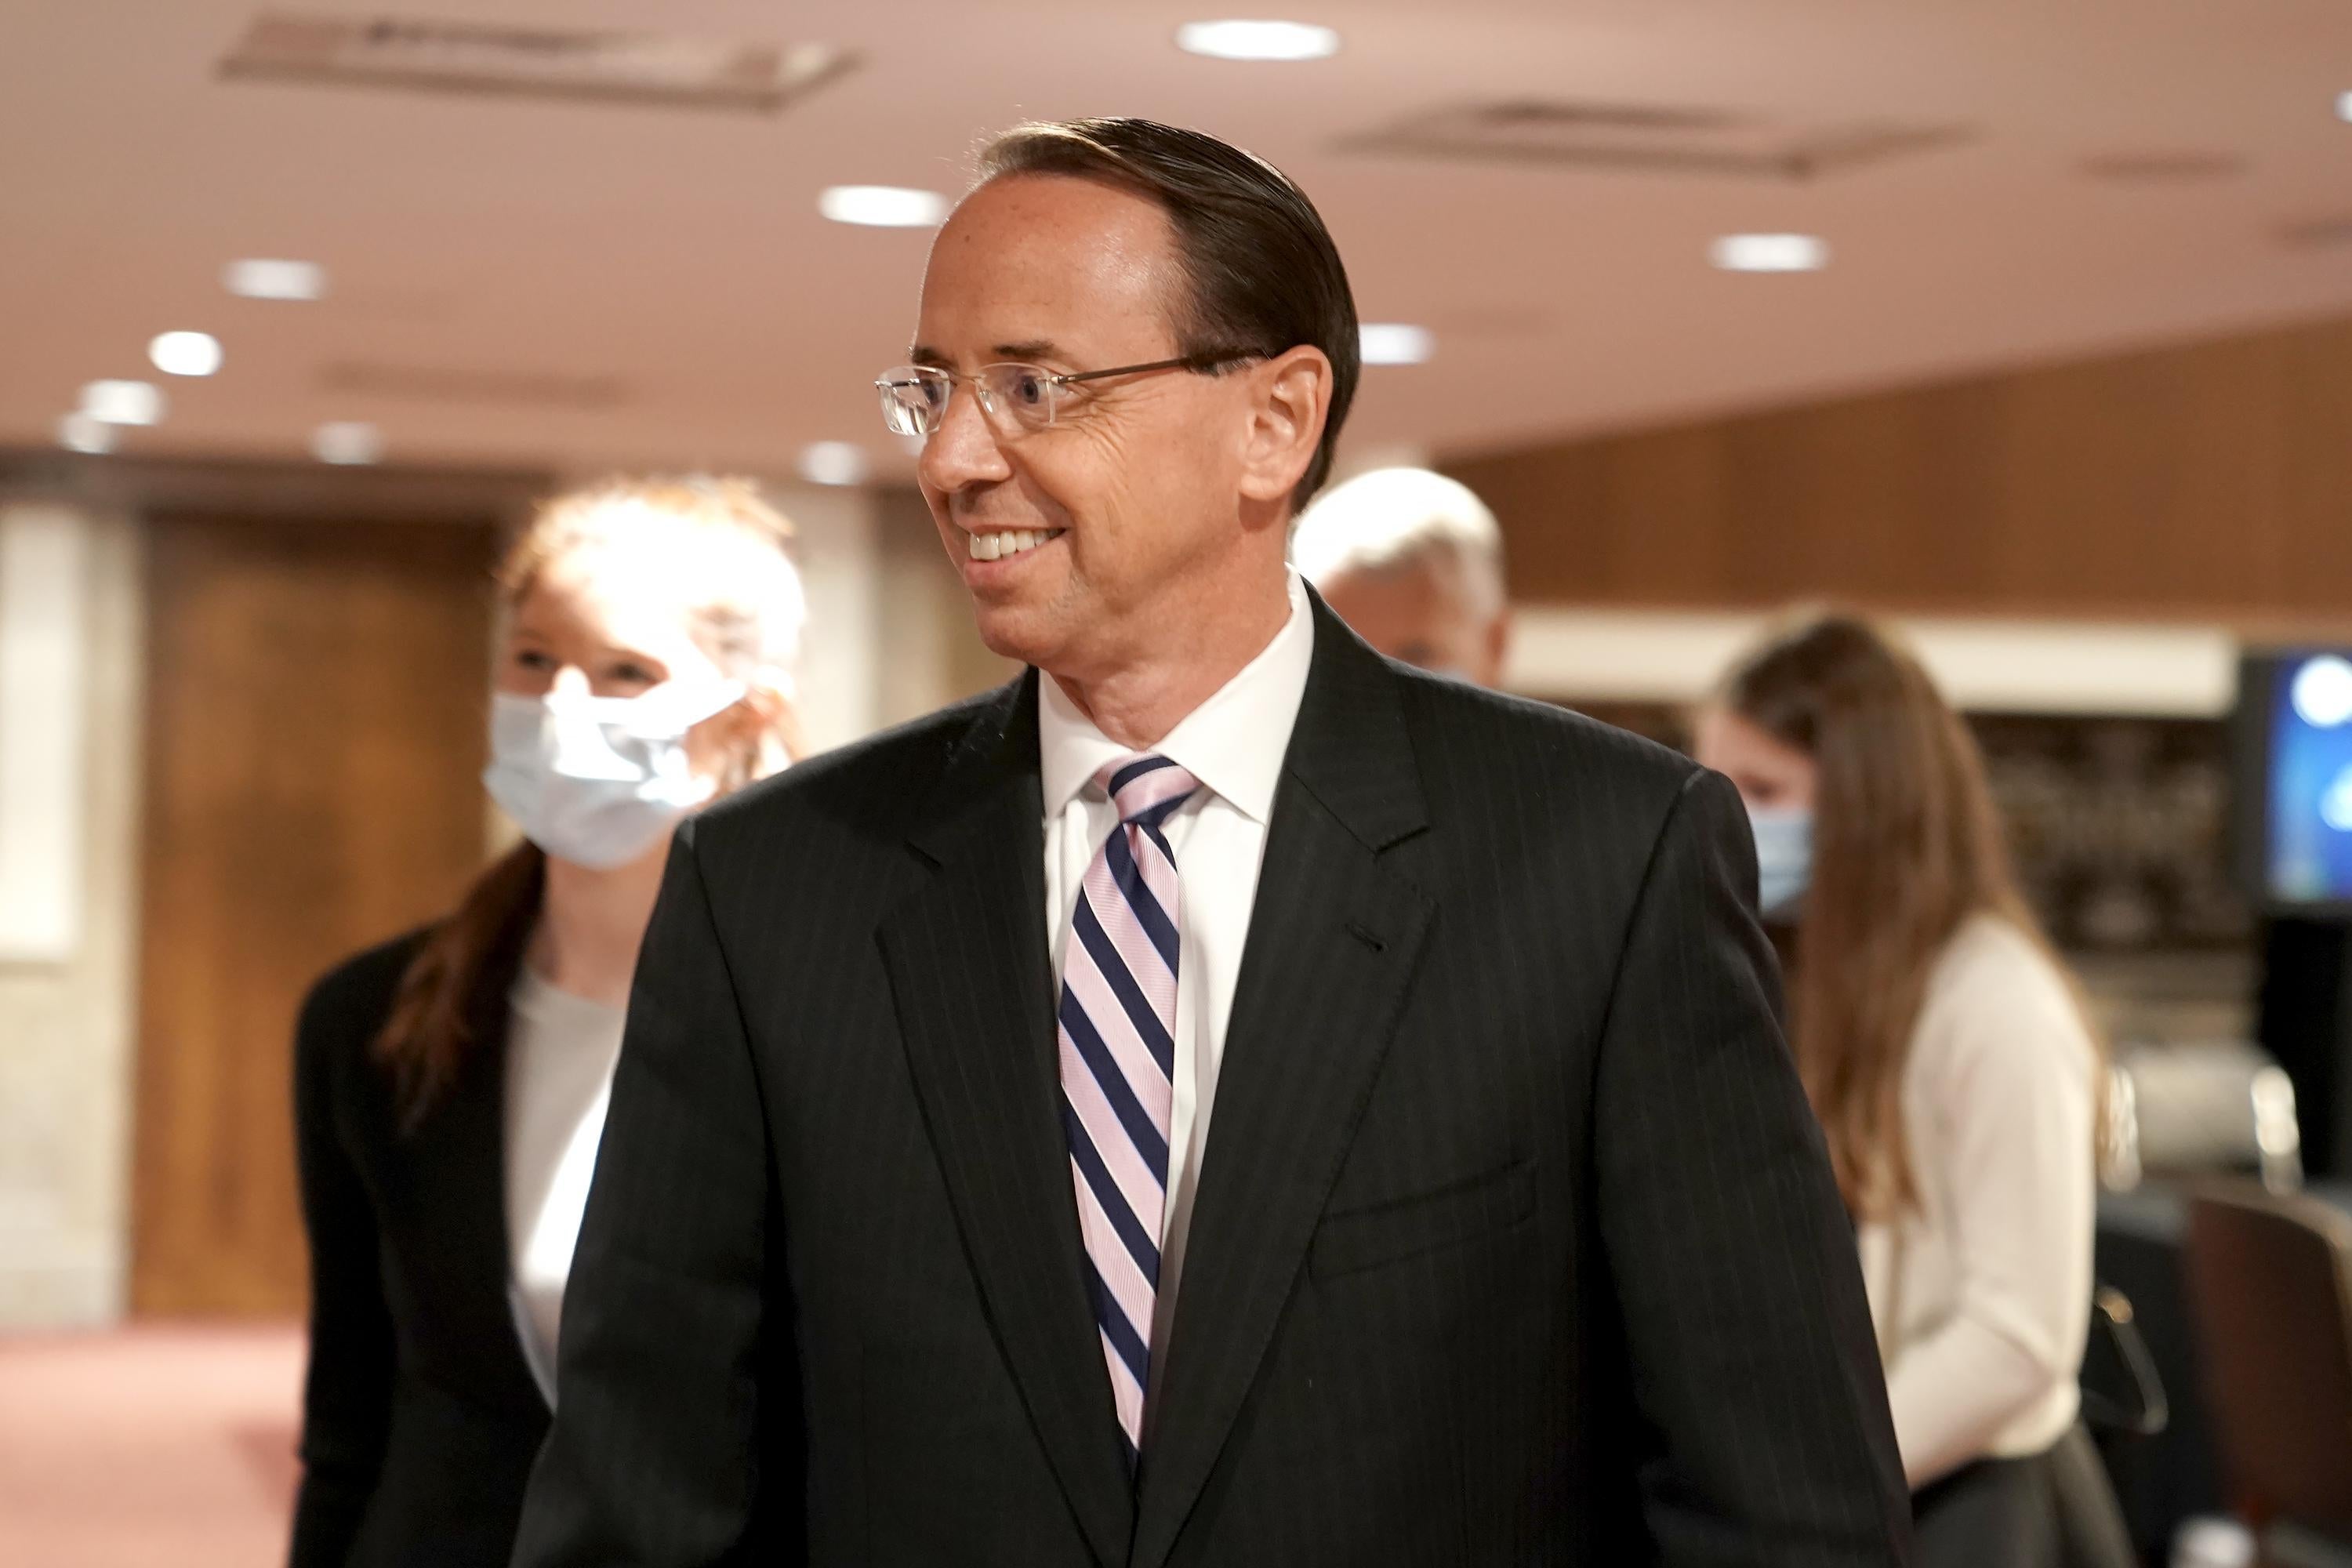 Former Deputy Attorney General Rod Rosenstein smiles widely as he leaves after a Republican-led Senate Judiciary Committee hearing on  "Crossfire Hurricane", the FBI's probe into Russian election interference and the 2016 Trump campaign in the Dirksen Senate Office Building in Washington, DC,on June 3, 2020.